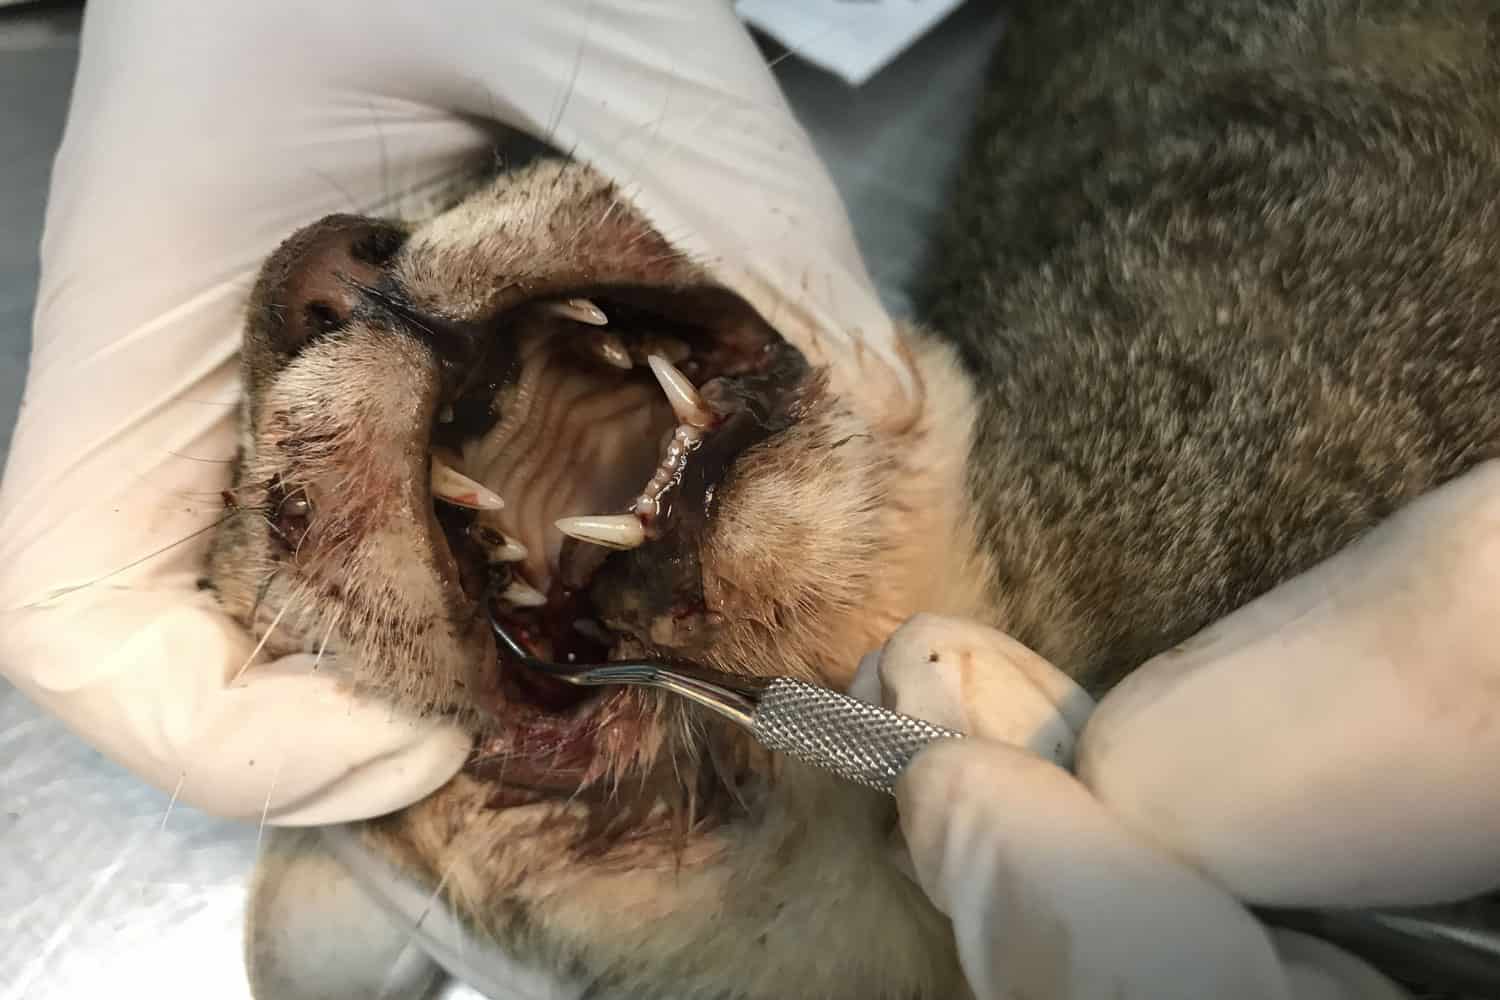 The cat with teeth problem and gingivitis during physical examination at the veterinary clinic
